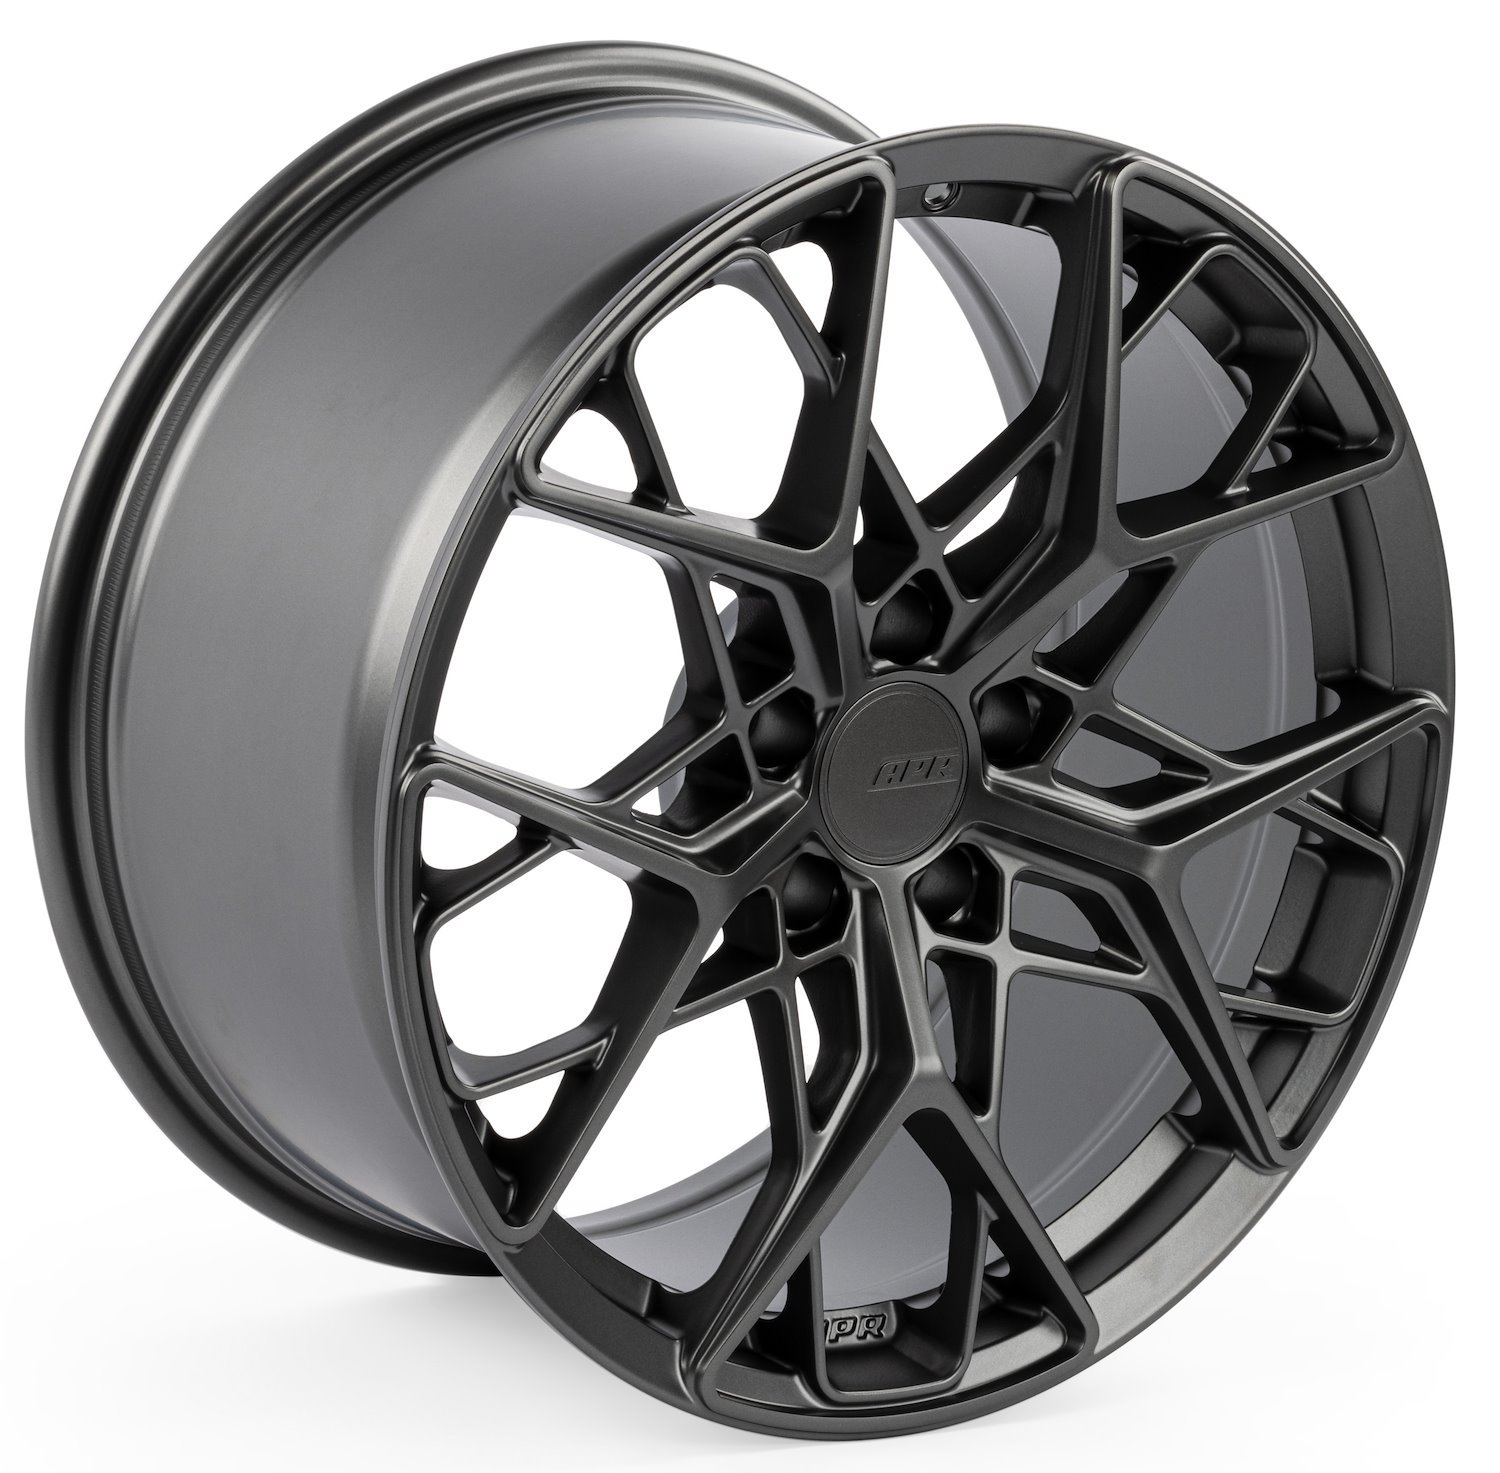 A02 Flow-Formed Wheel, Size: 19 x 8.50" [Anthracite]